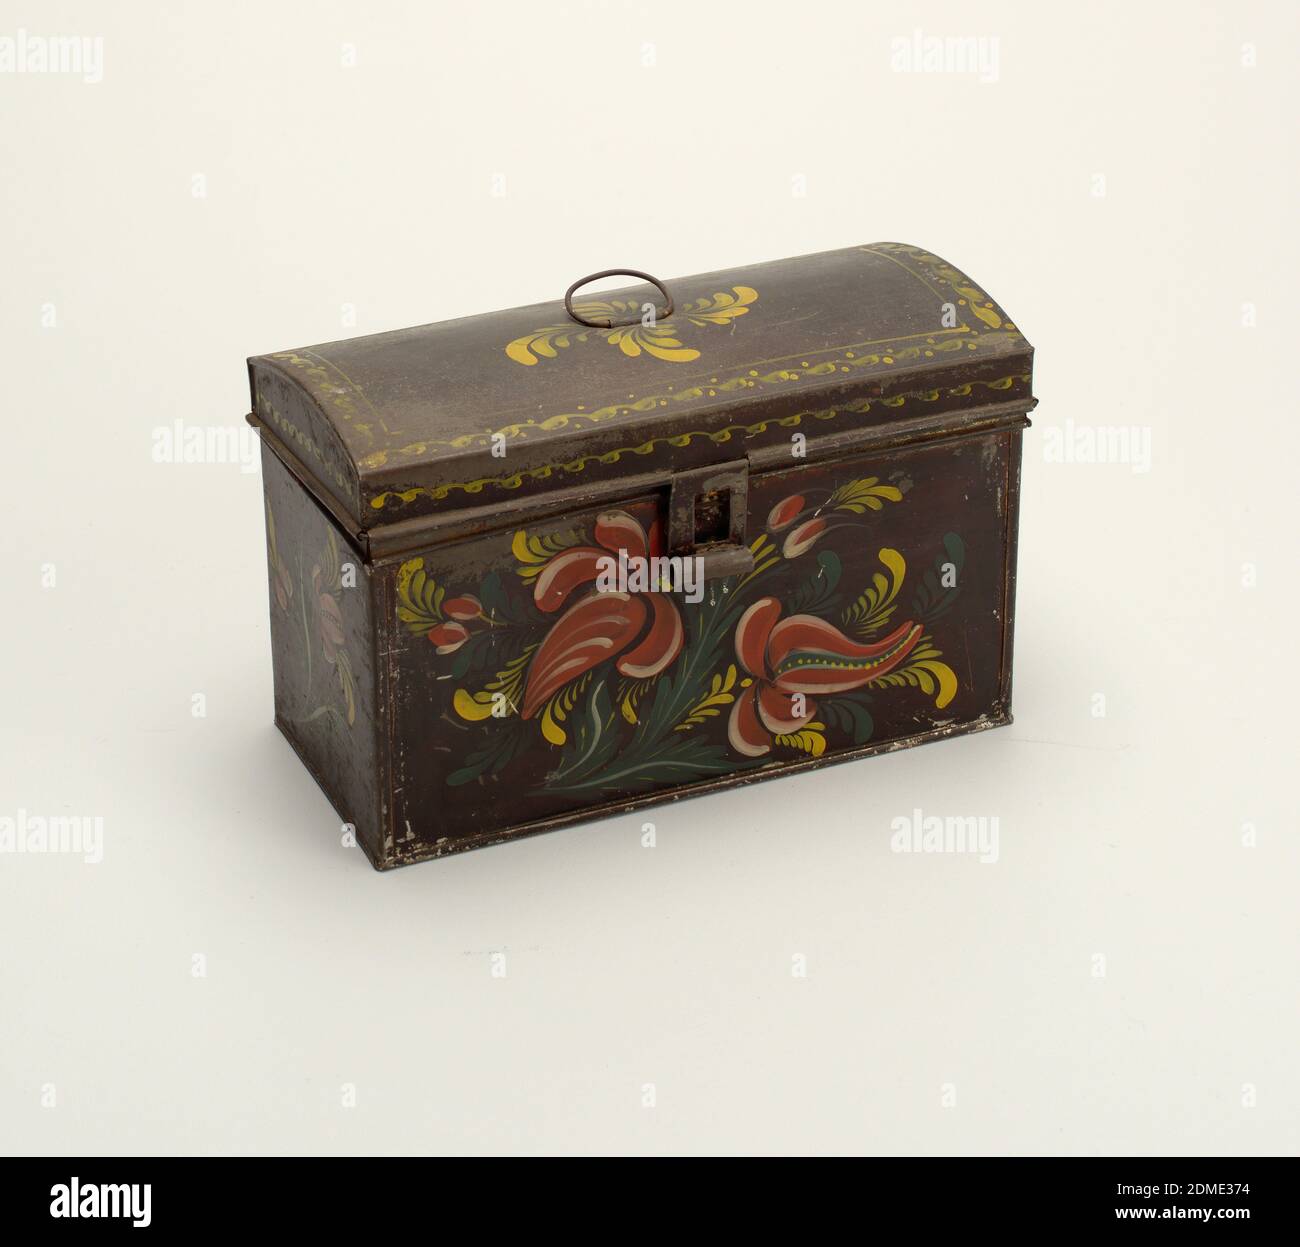 Box, Tôle (painted tin), Rectangular box with hinged cover domed from front to back. Ring bail handle on top of cover and hasp fastener, with staple broken off. Box is painted black with floral decoration on front and ends of vermillion fruit-like flowers, with white and alizarin markings, and with serrated green leaves and leaf-fronds. Cover is decorated on front and ends with a border of lapped and recumbent 'S's in yellow and similar band with dots frames the top. Spiral arrangement of leaf-fronds in yellow around handle., New York, USA, early 19th century, metalwork, Decorative Arts, Box Stock Photo